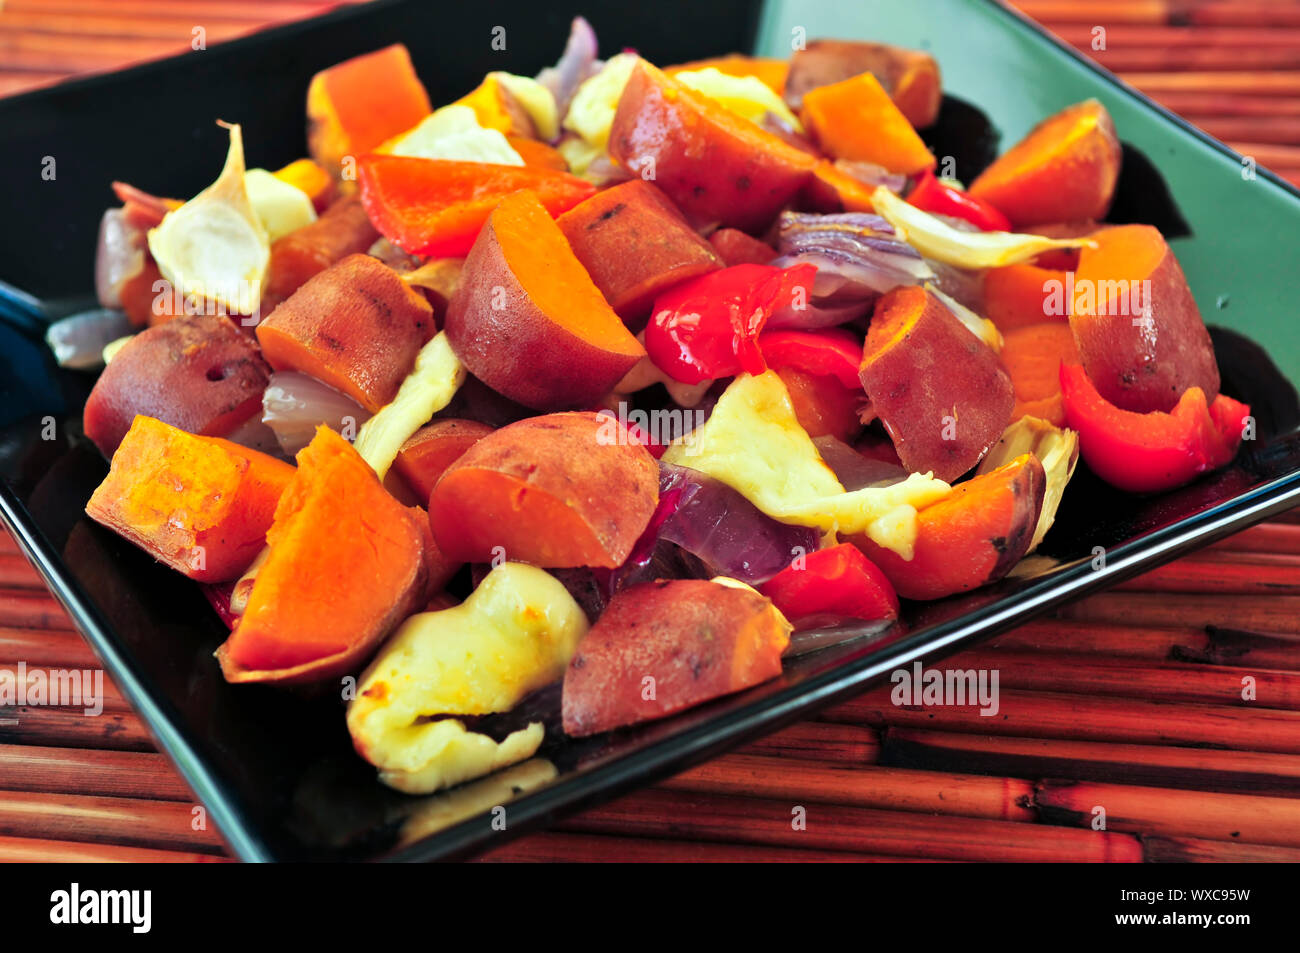 Vegetarian dish of roasted yams with cheese and peppers Stock Photo